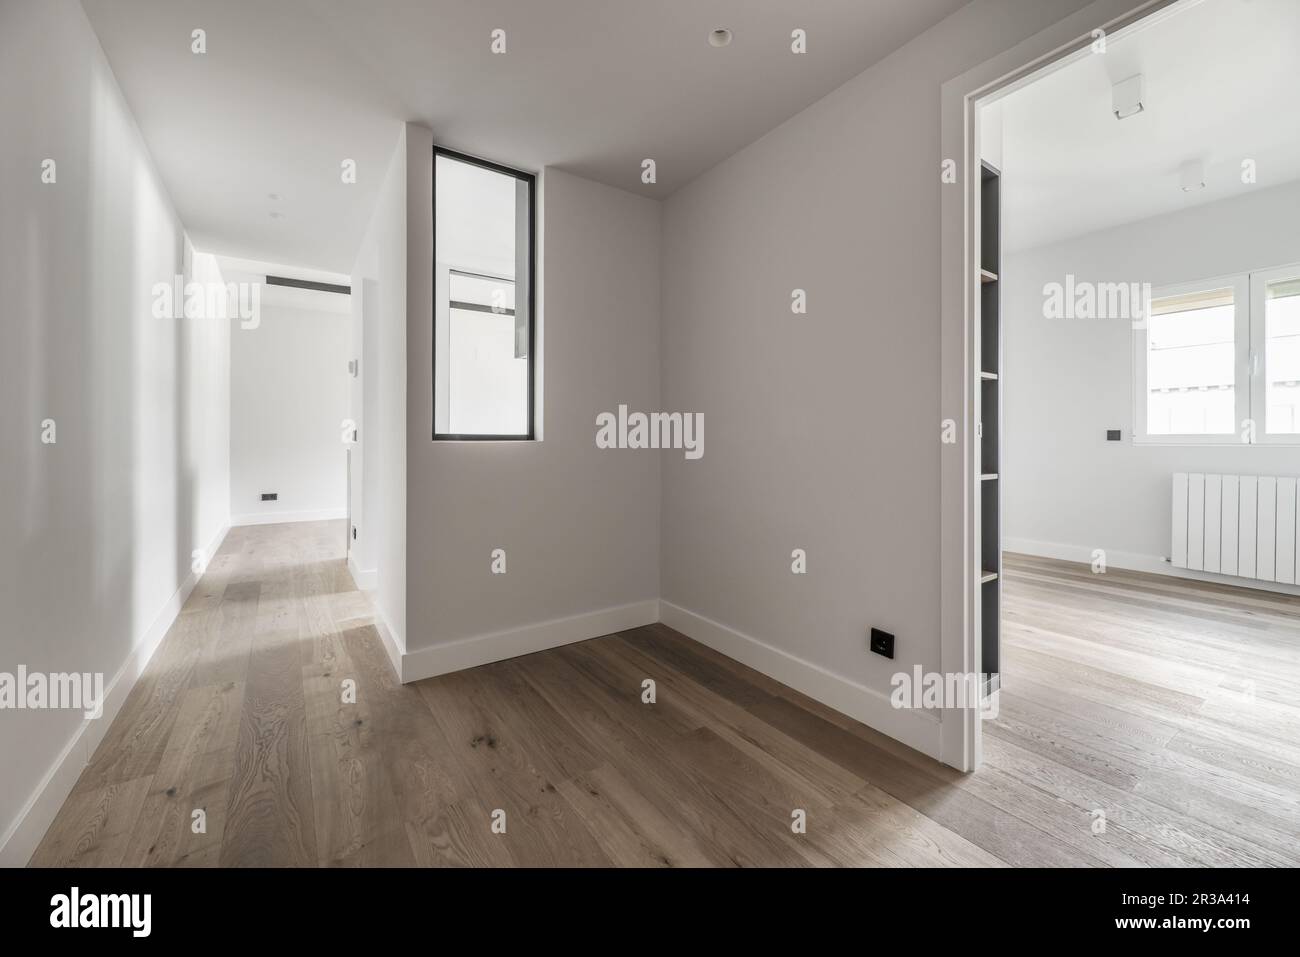 Distributor of recently renovated house with skylight and wooden floors and access to other rooms Stock Photo